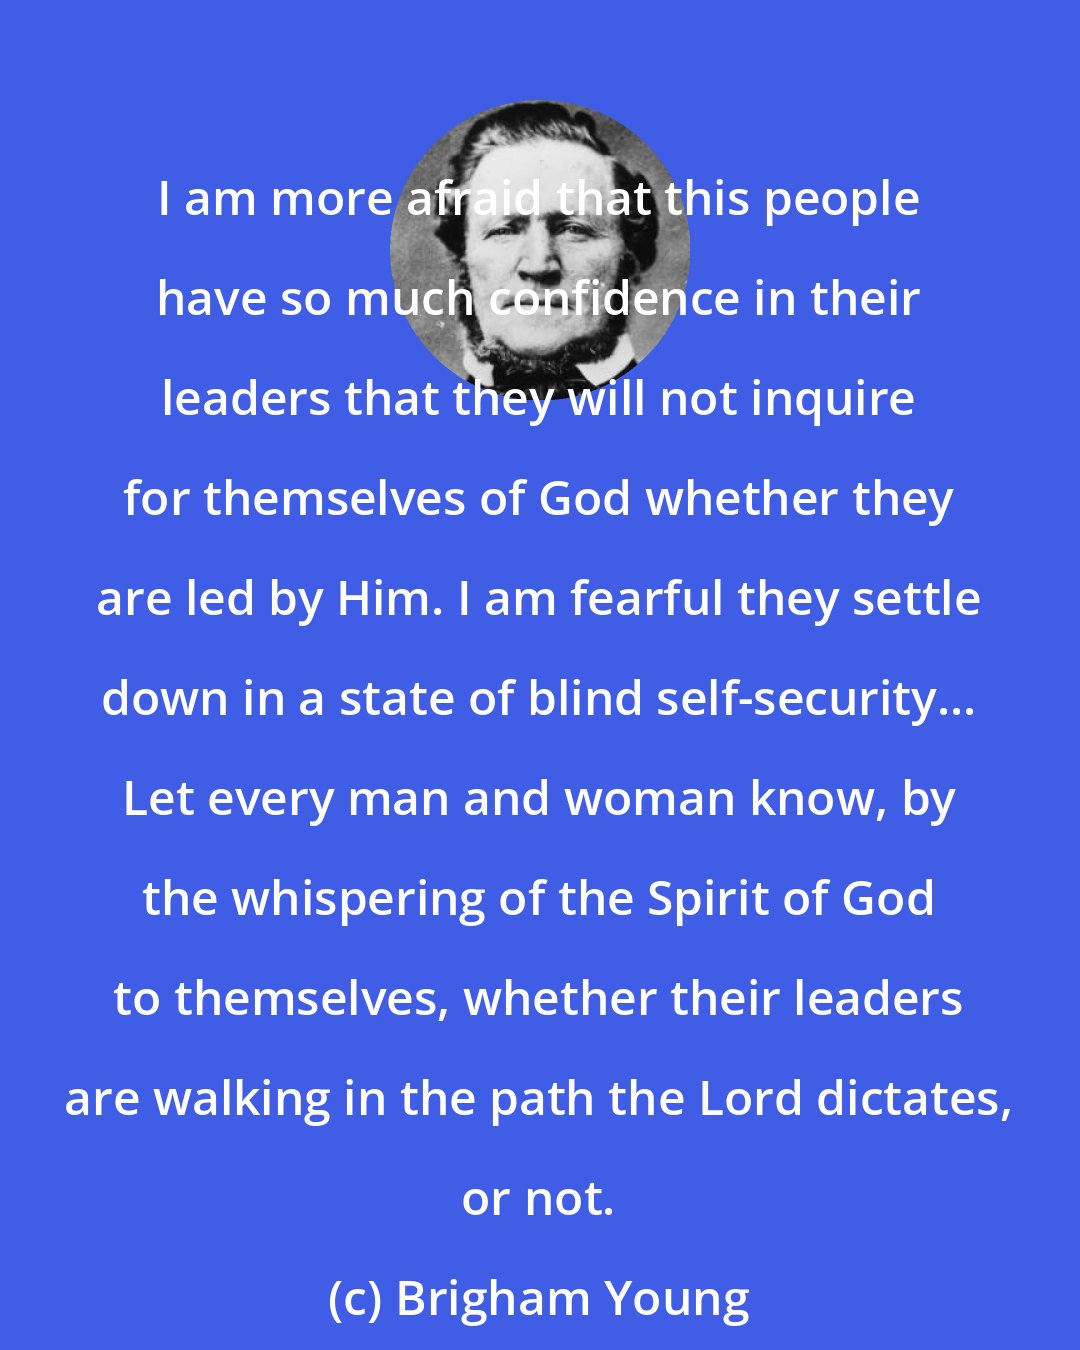 Brigham Young: I am more afraid that this people have so much confidence in their leaders that they will not inquire for themselves of God whether they are led by Him. I am fearful they settle down in a state of blind self-security... Let every man and woman know, by the whispering of the Spirit of God to themselves, whether their leaders are walking in the path the Lord dictates, or not.